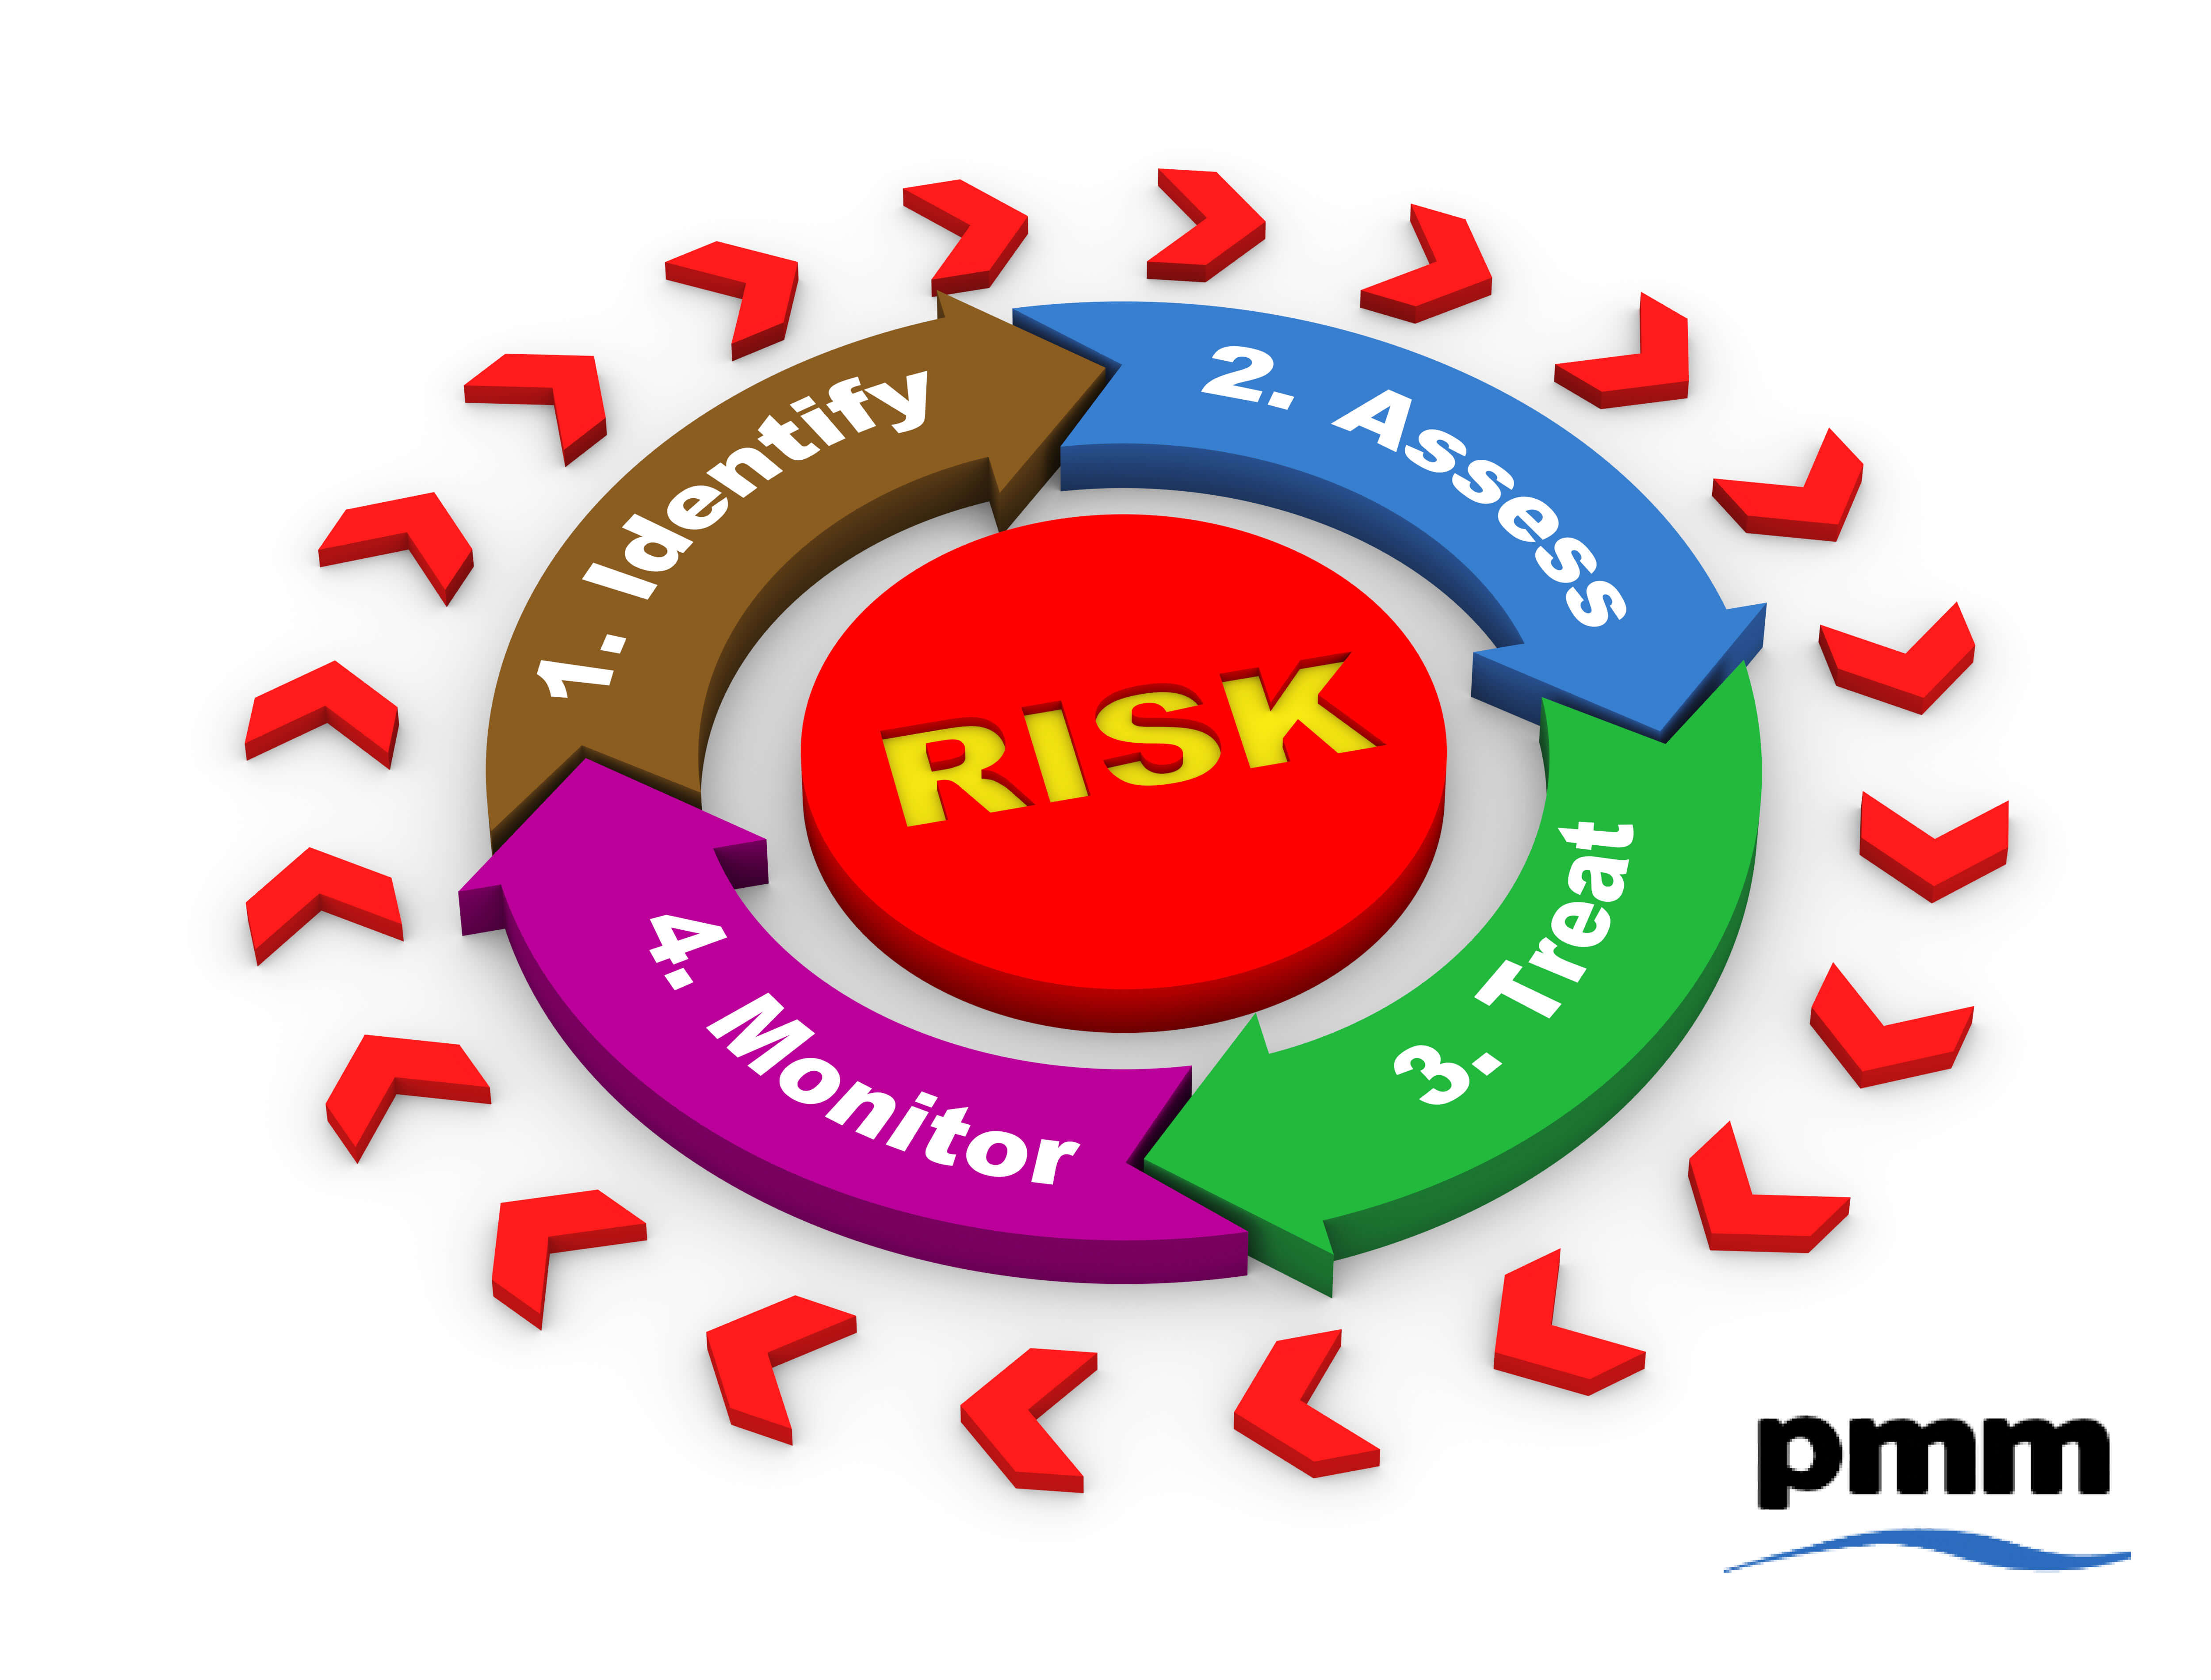 How to identify project risks